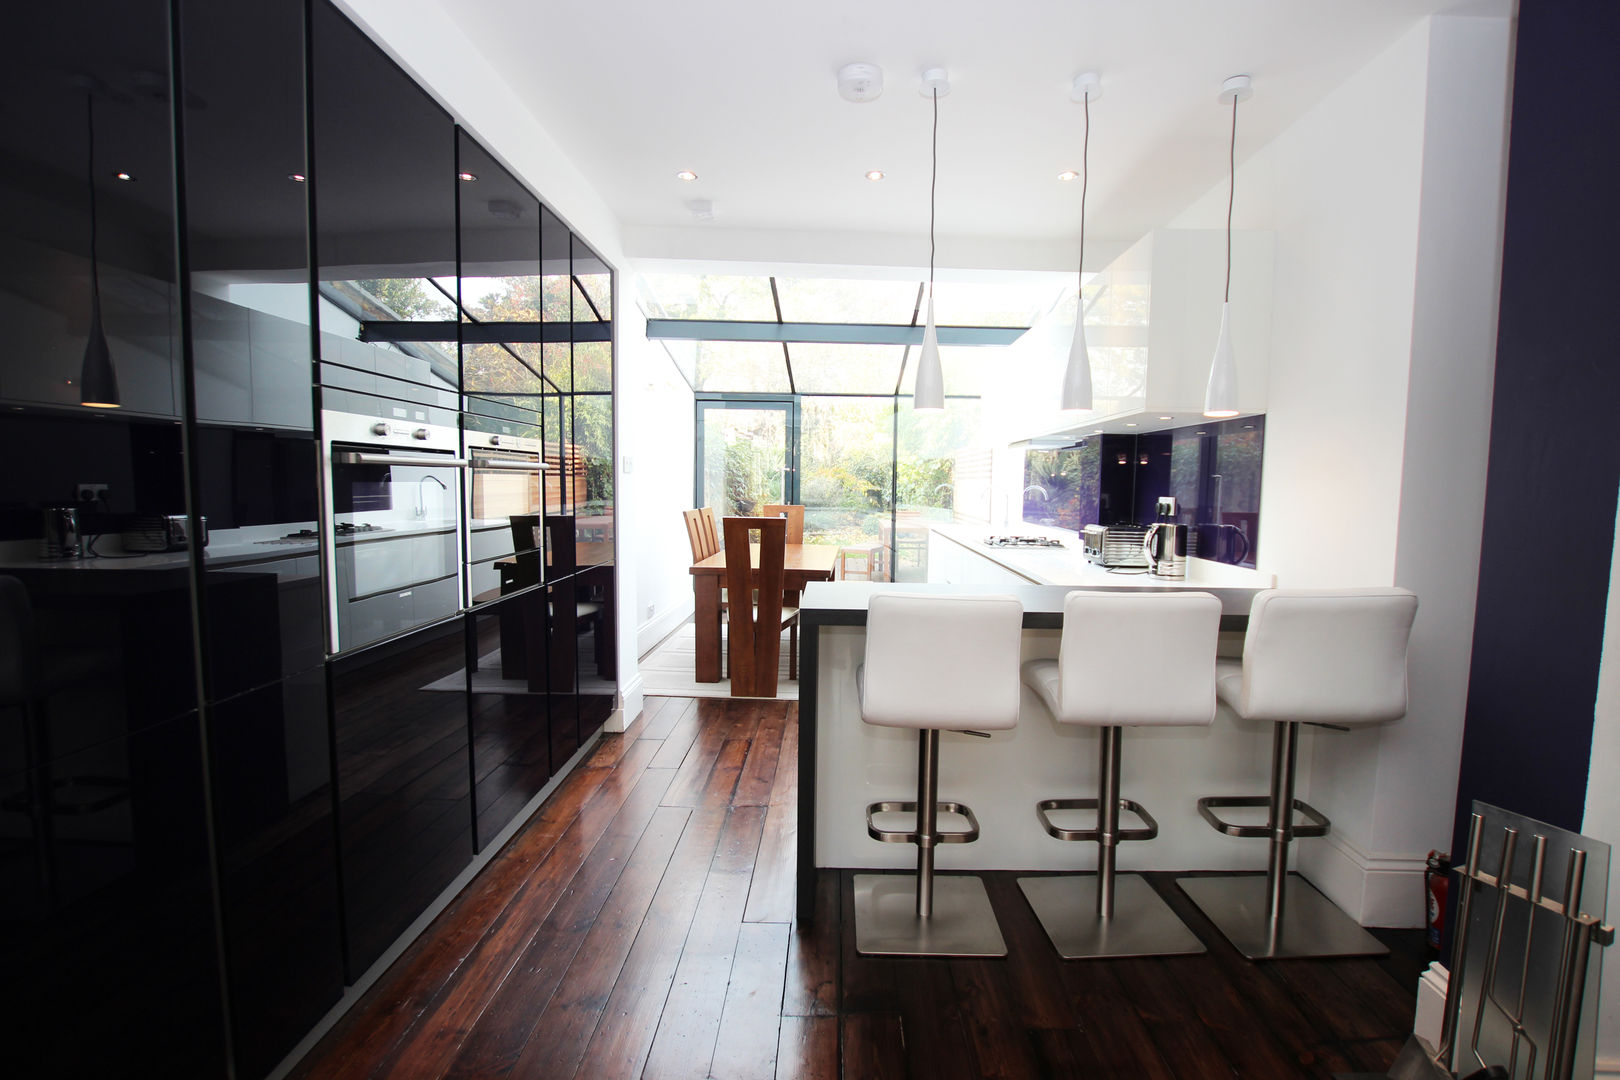 Purple gloss glass with white gloss lacquer kitchen units​ LWK London Kitchens مطبخ